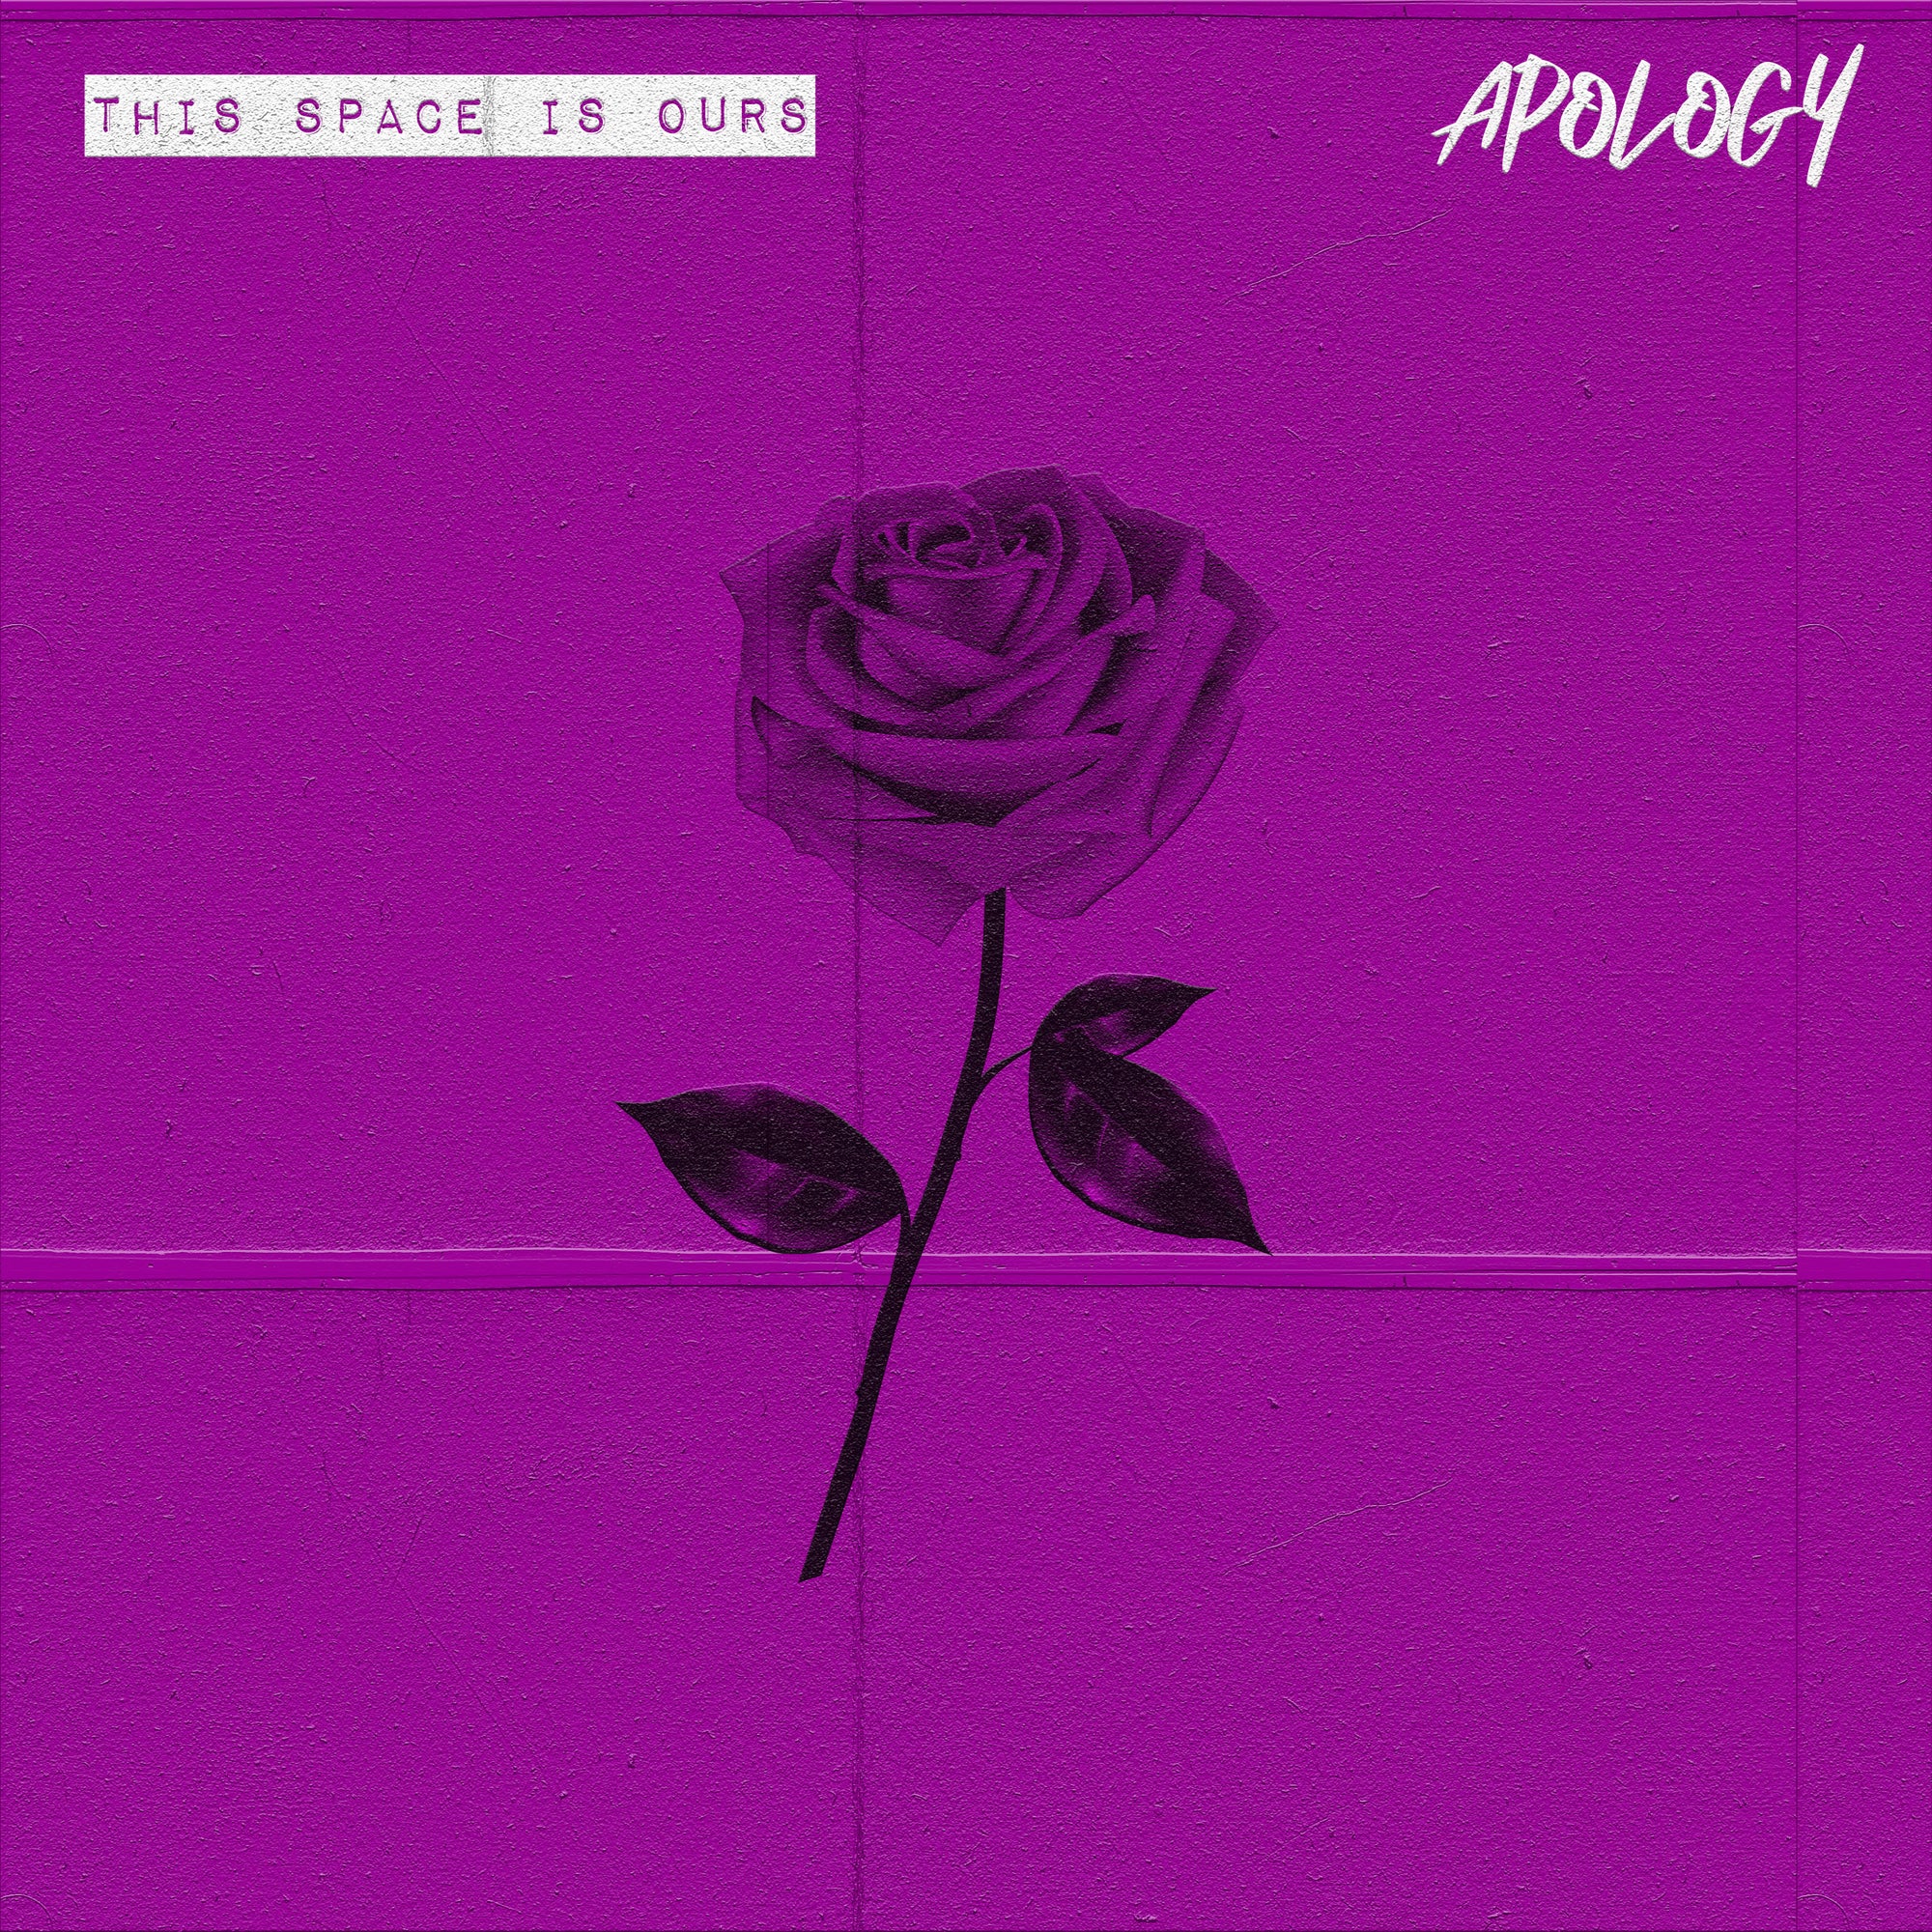 This Space is Ours - 'Apology'